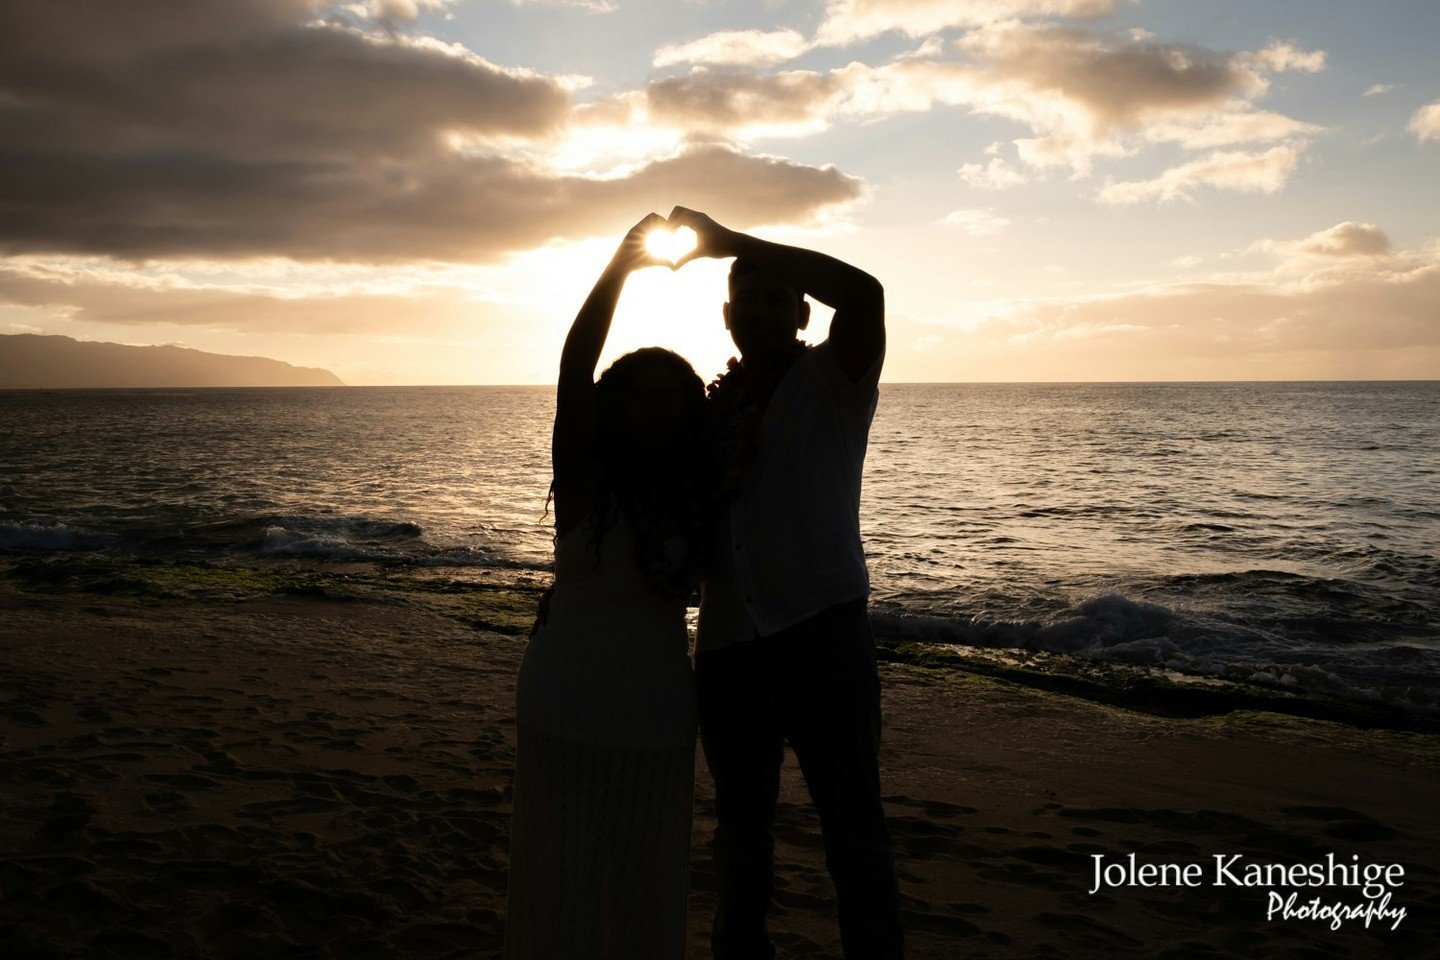 Hand in hand, heart in heart, with the horizon bearing witness to our love. 

#SunsetLovers #BeachRomance #TogetherForever #SheSaidYes #surpriseproposal #hawaiiproposal #oahuproposal #engagementphotographer #proposalphotography #secretengagement #wil